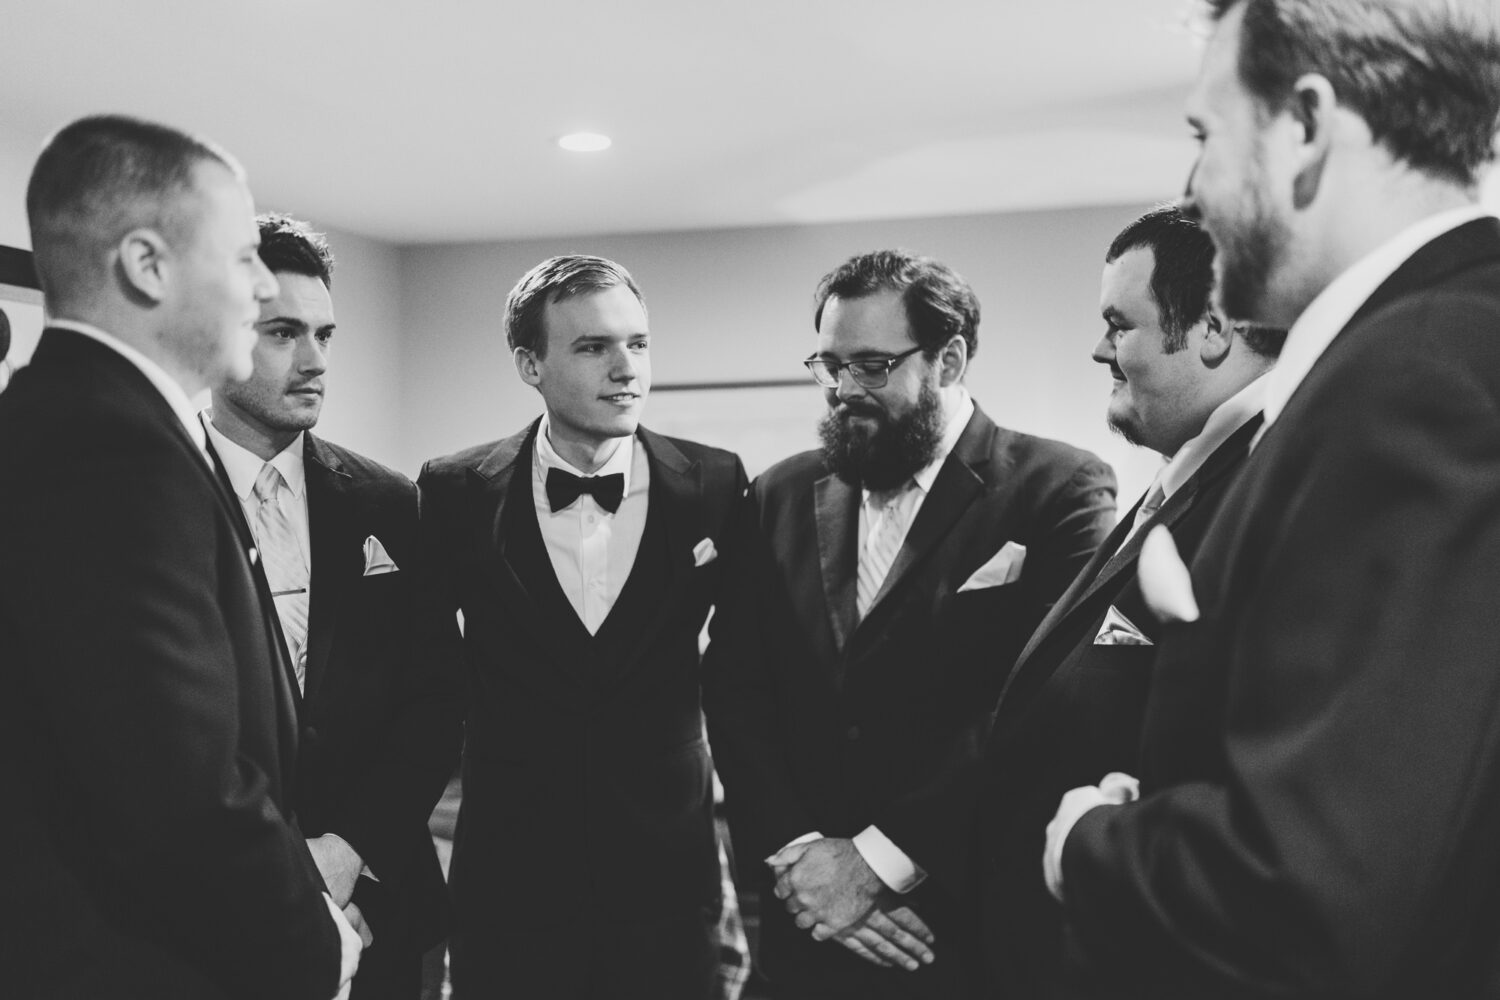 groom hanging out with his groomsmen on his wedding day